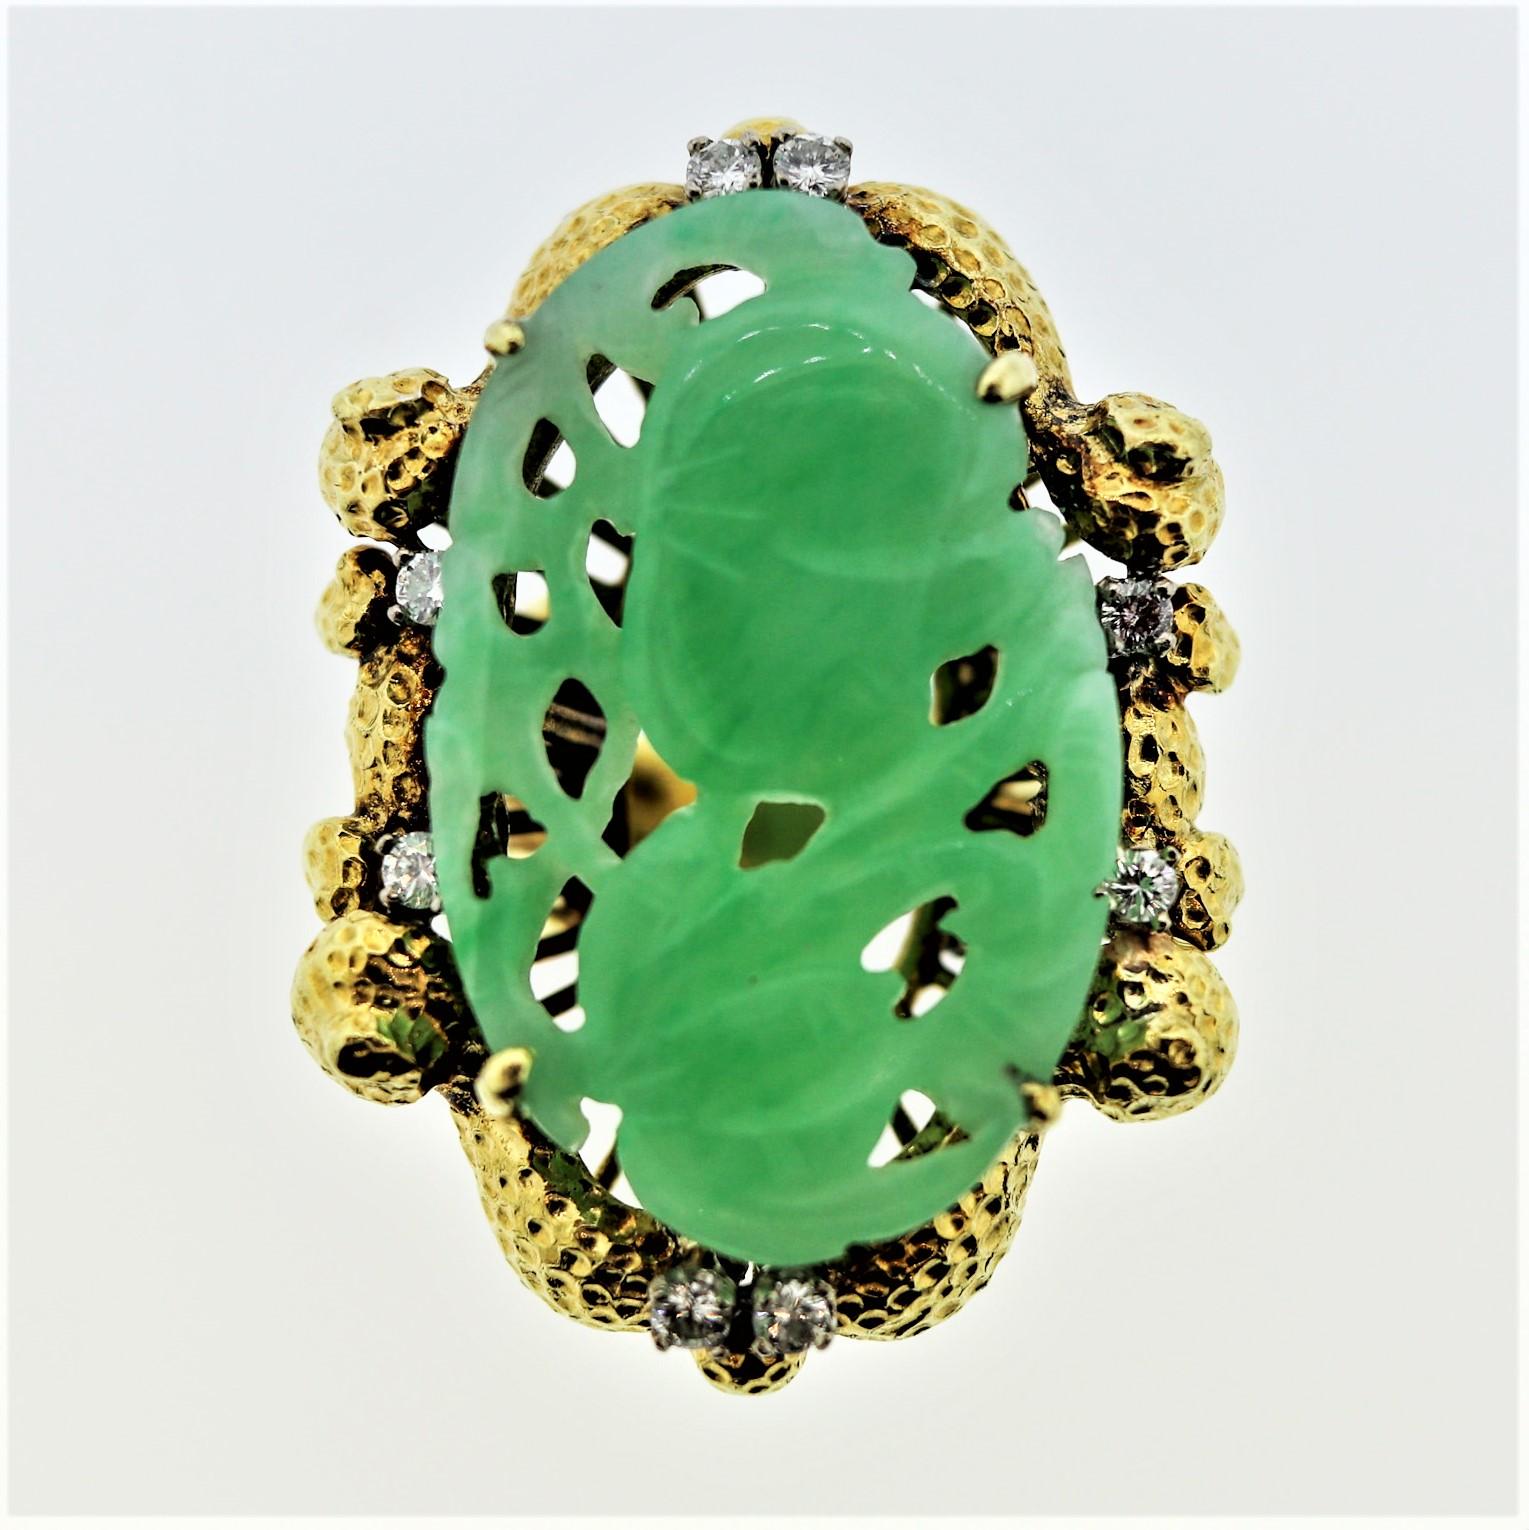 A large and highly detailed jadeite jade ring that doubles as a work of art! It is stunning in its design and natural motifs which include the jade. The jade is hand carved to depict natural foliage blowing in the wind. It is complemented by 8 round